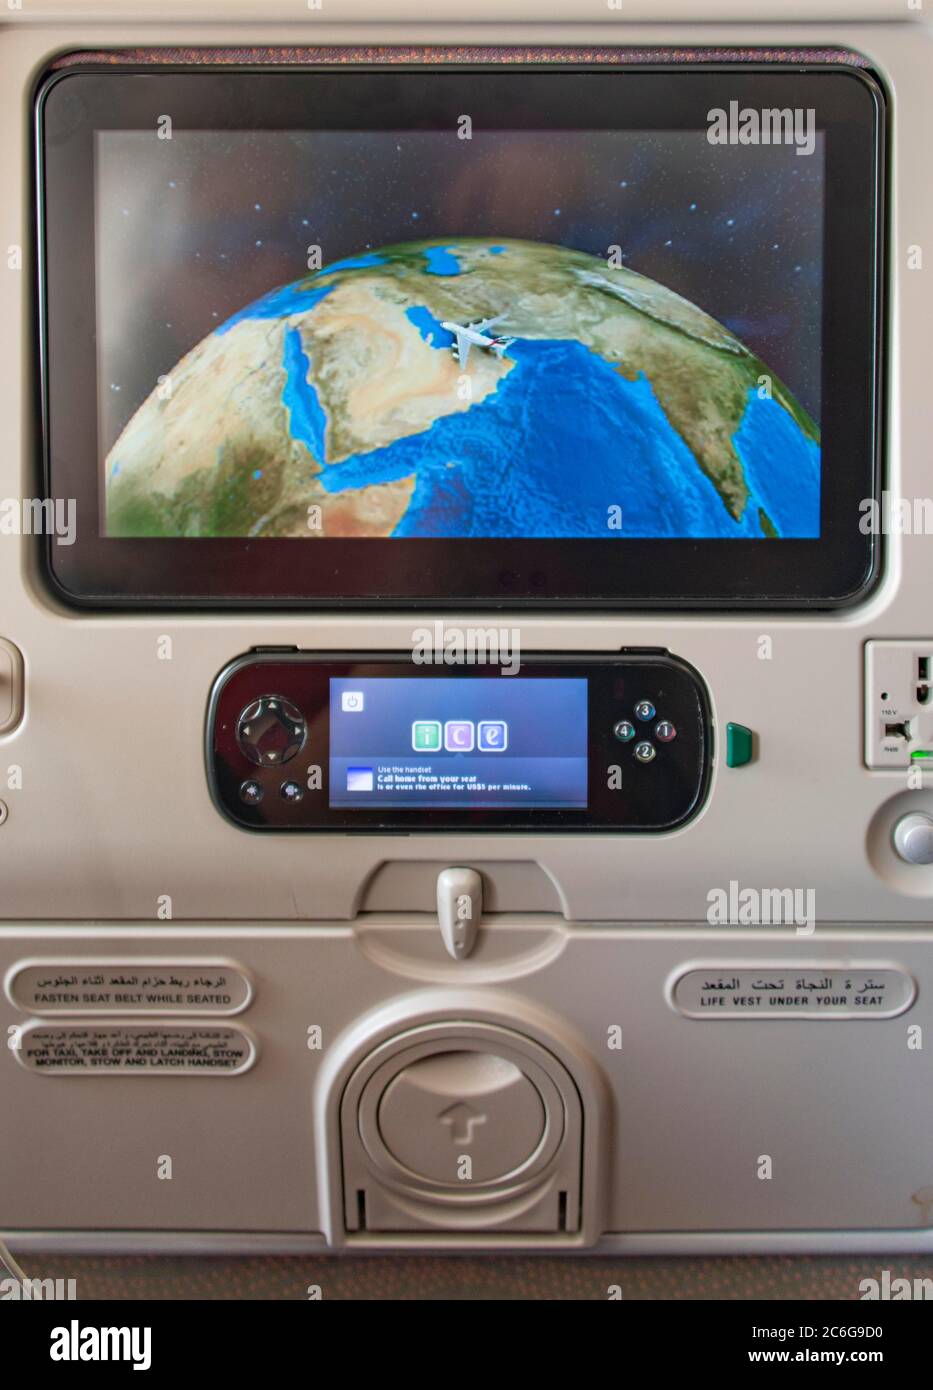 Screen showing the flight position Dubai at seat in aircraft, Emirates airline, interior view, Dubai, United Arab Emirates Stock Photo